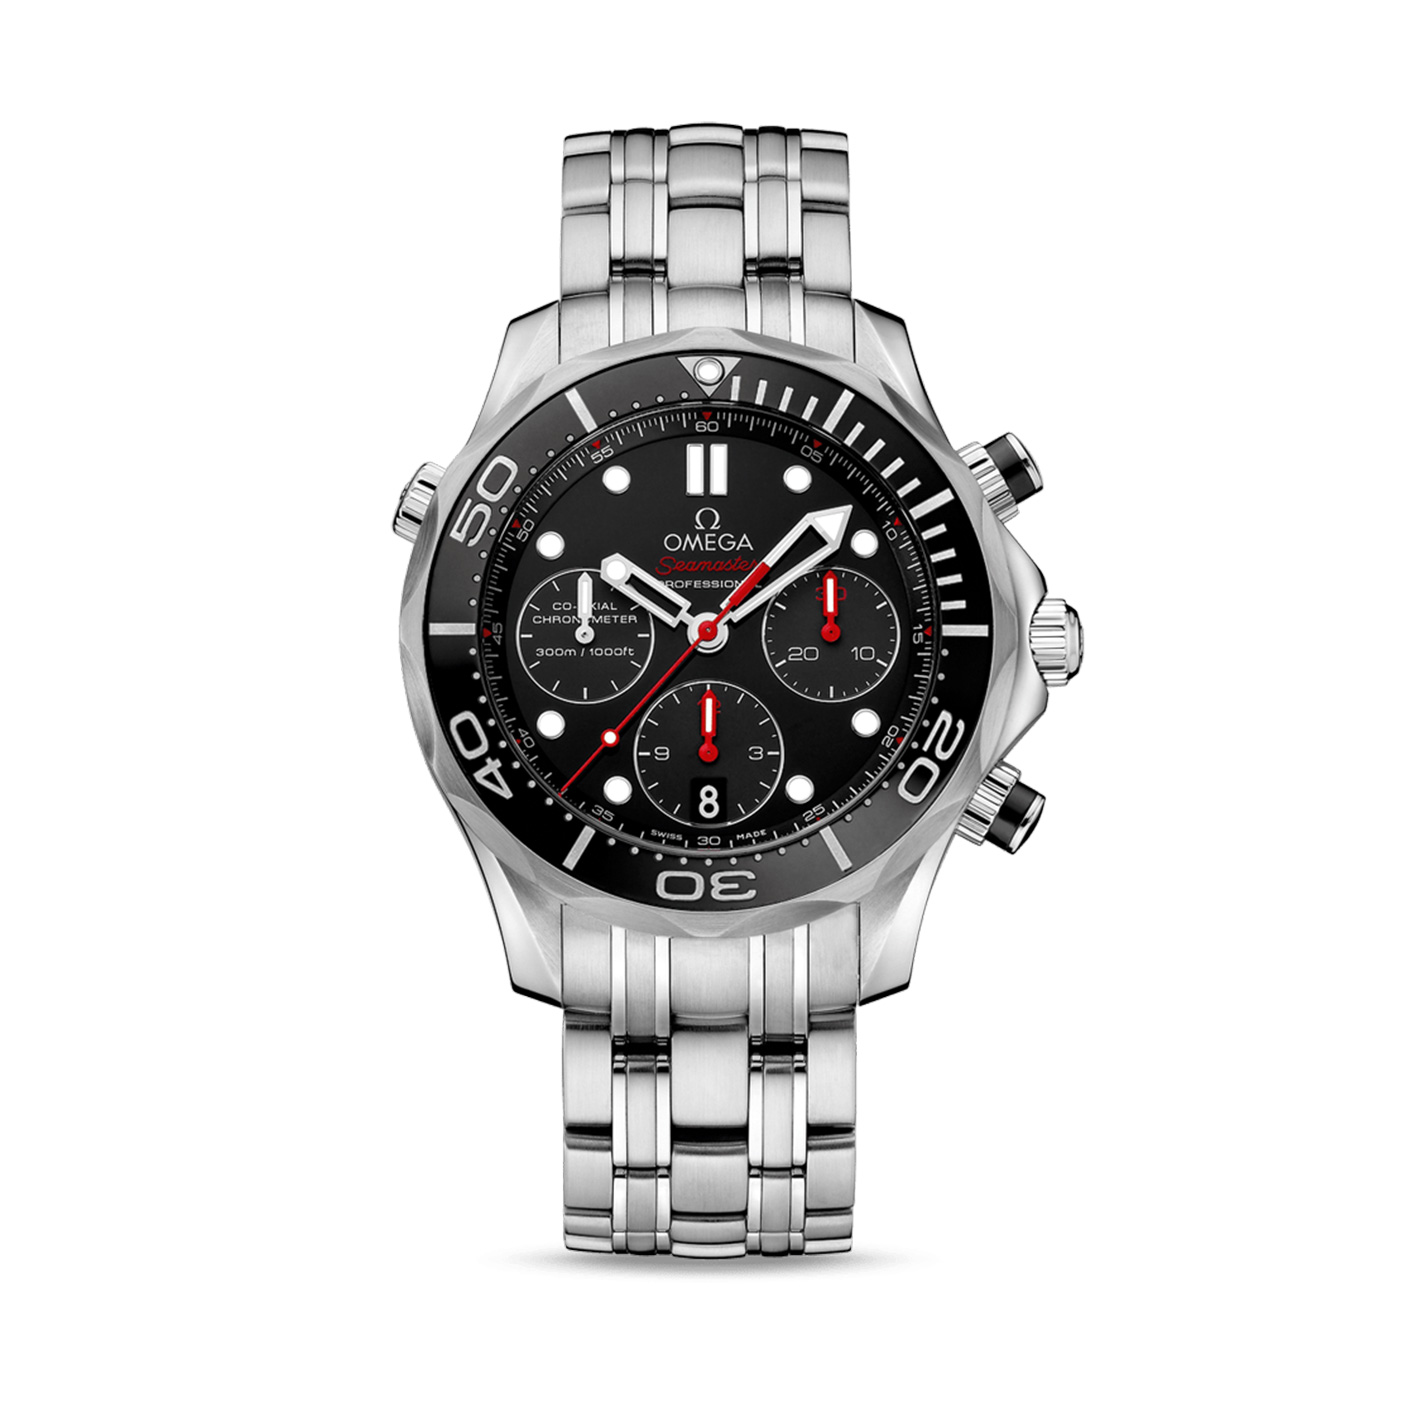 Omega Seamaster Diver 300 M Co-Axial Chronograph Watch